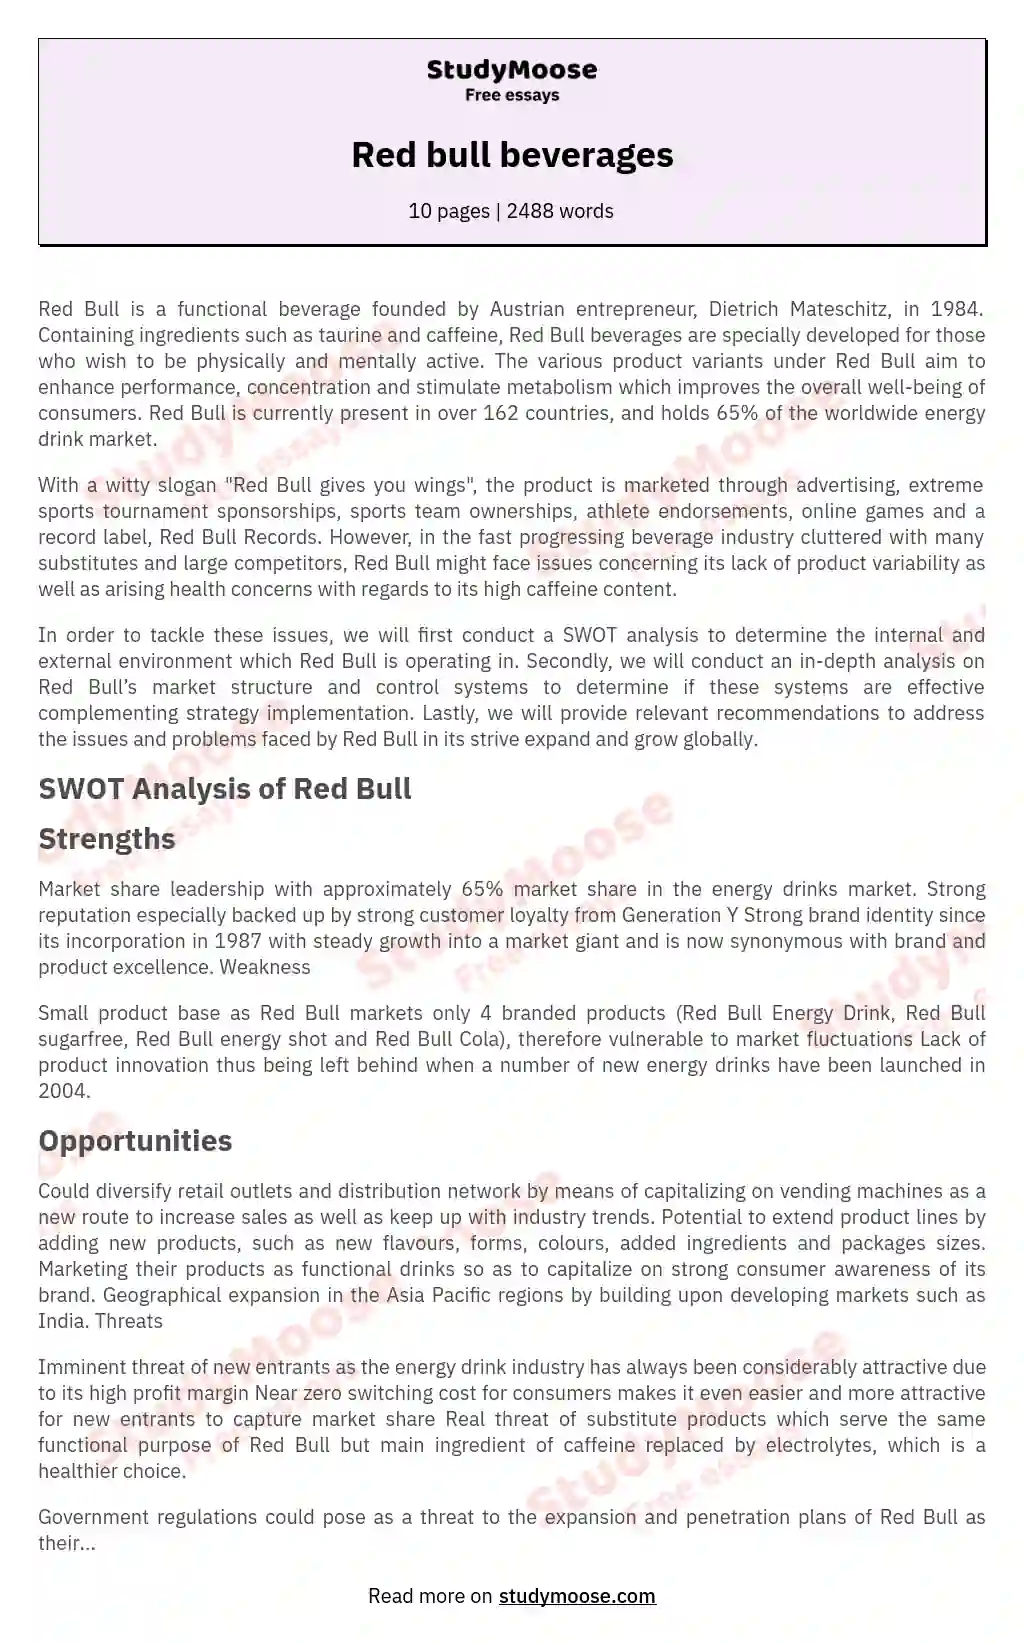 Red Bull: SWOT Analysis and Growth Strategies essay